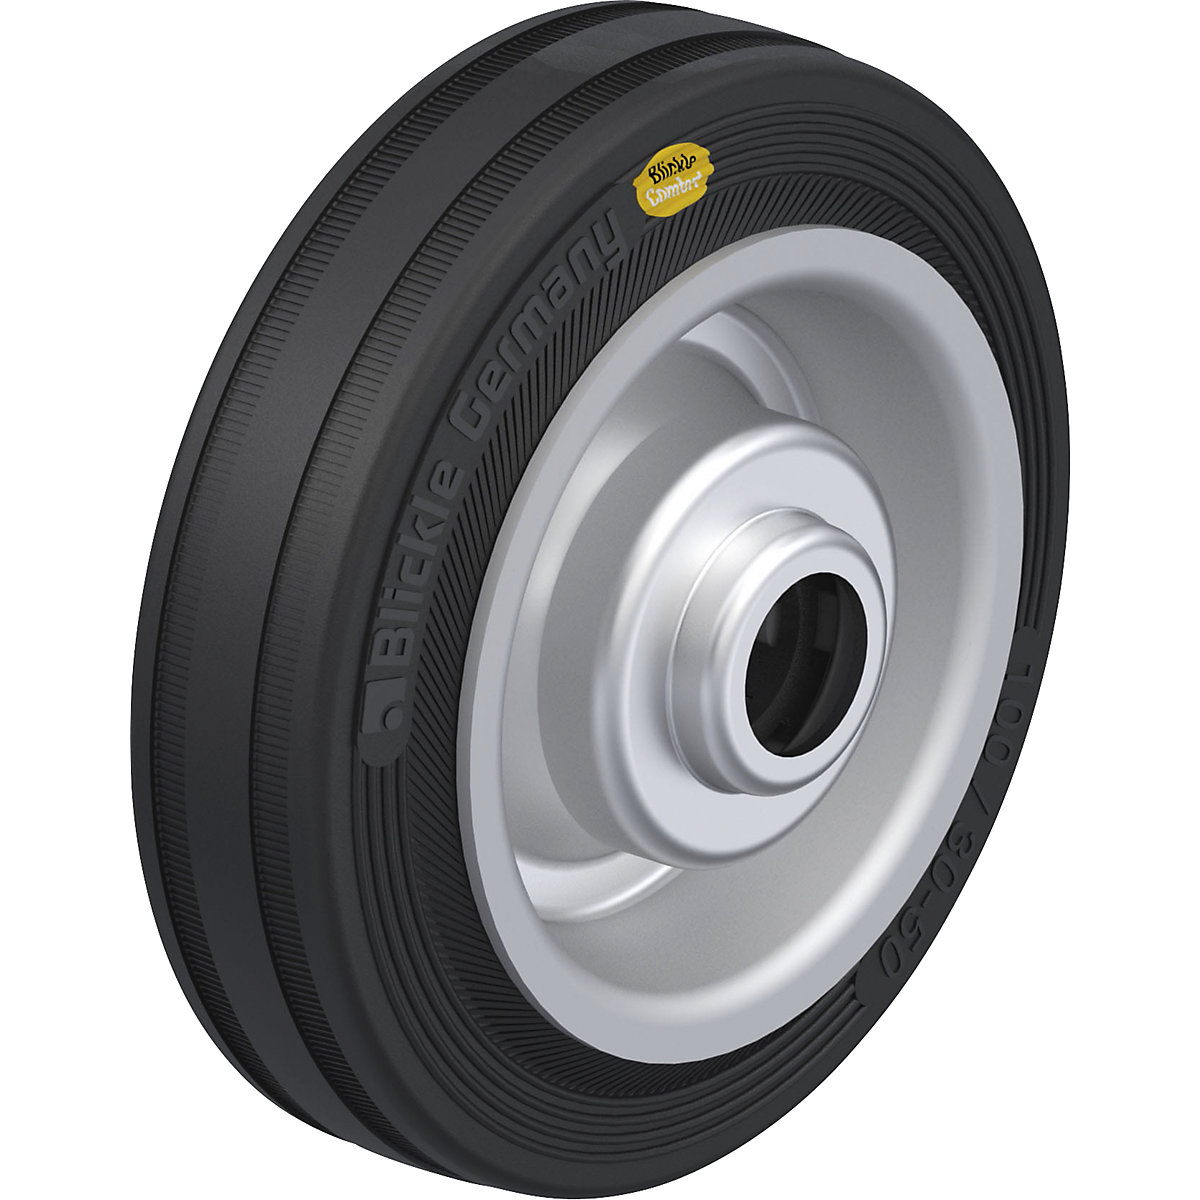 Wheel with two component solid rubber tyres